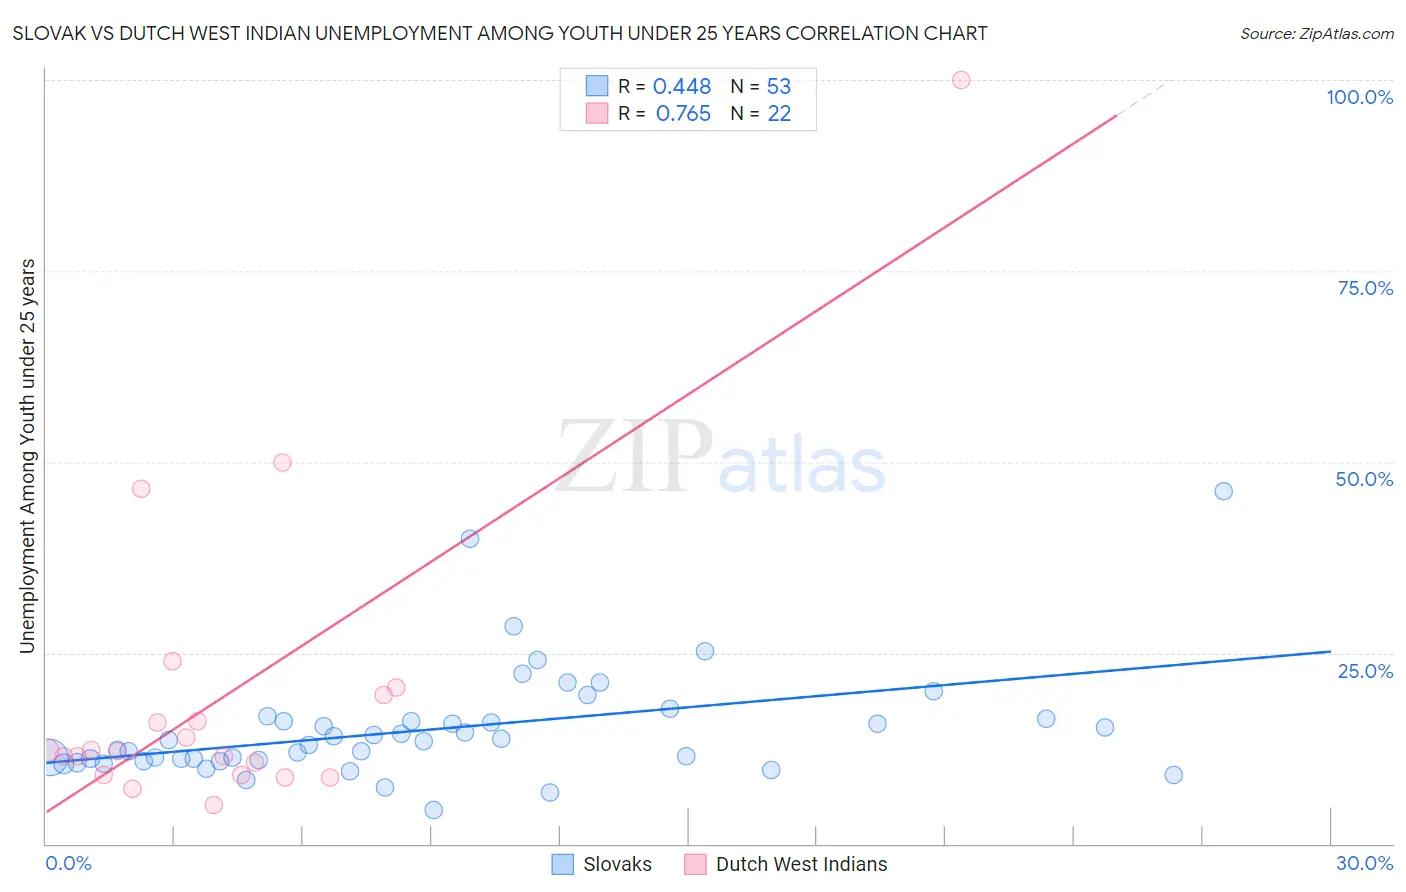 Slovak vs Dutch West Indian Unemployment Among Youth under 25 years